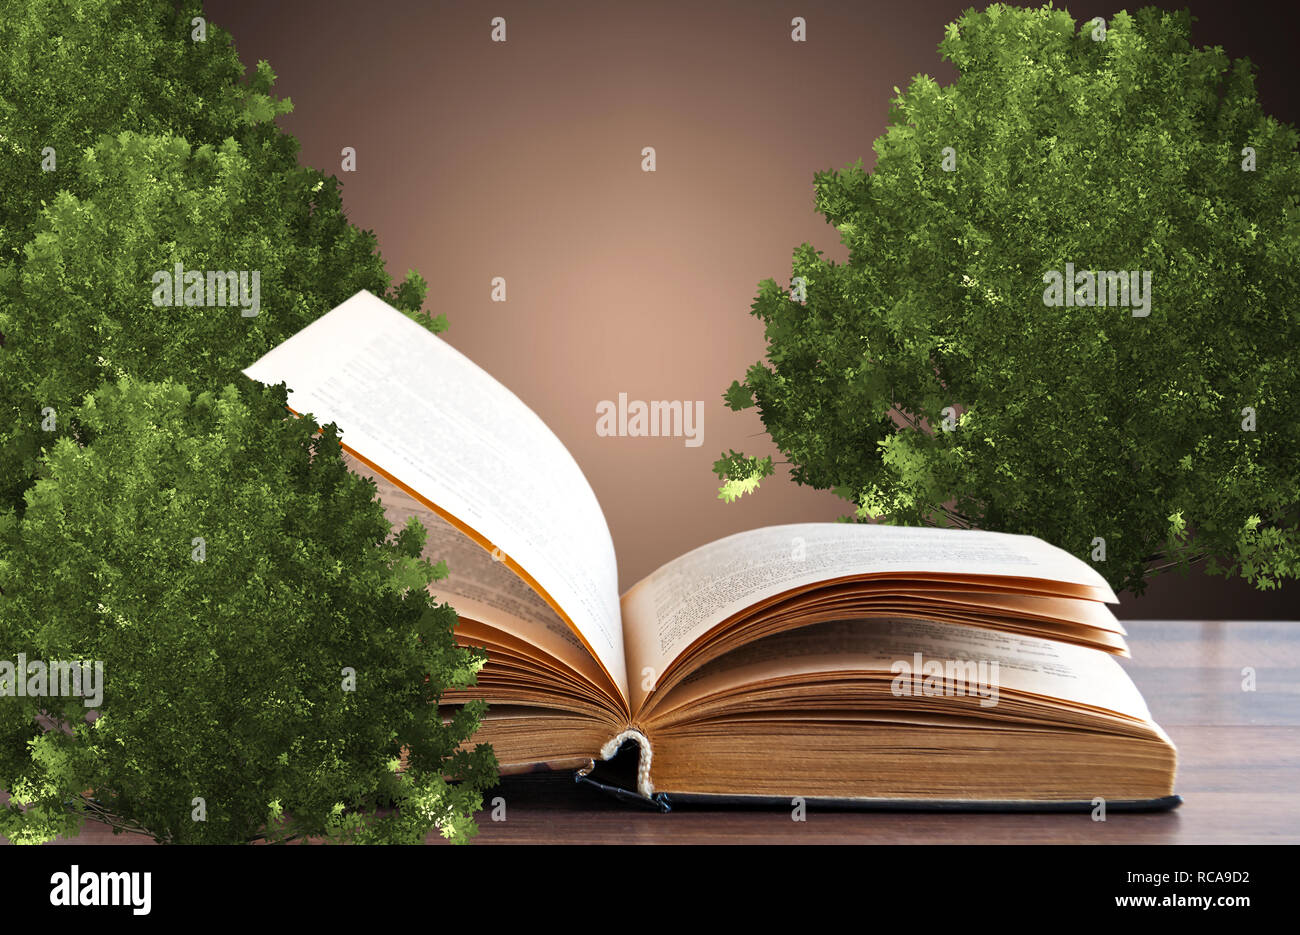 The concept of a book or a tree of knowledge with an oak tree growing nearby Stock Photo